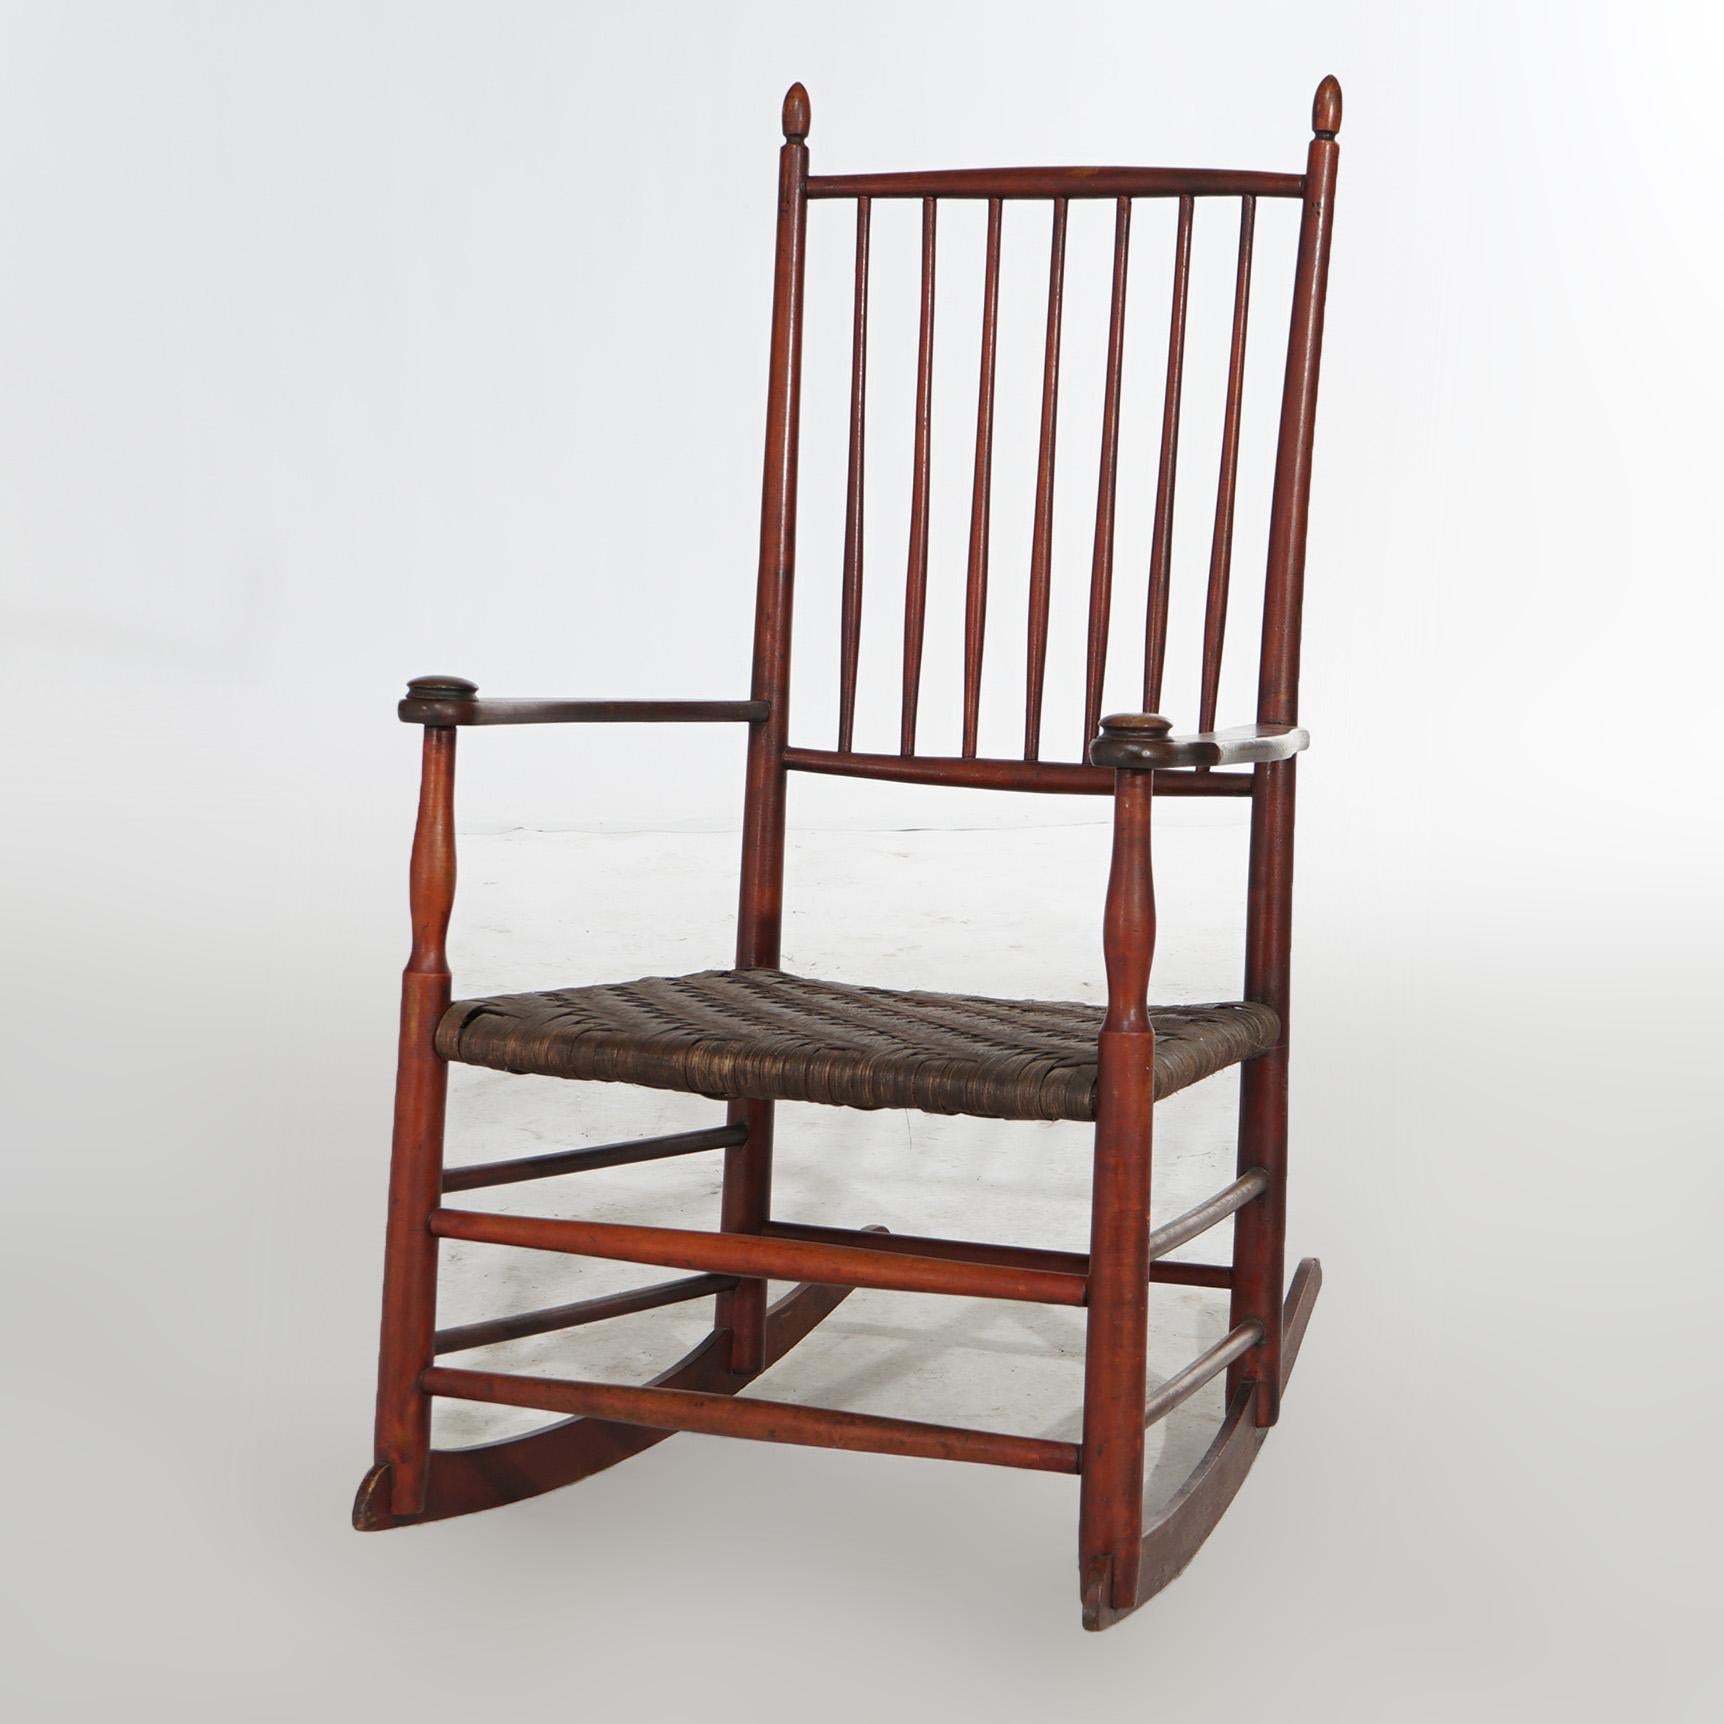 American Antique Shaker Rocking Chair with Thatch Rush Seat, 19th C